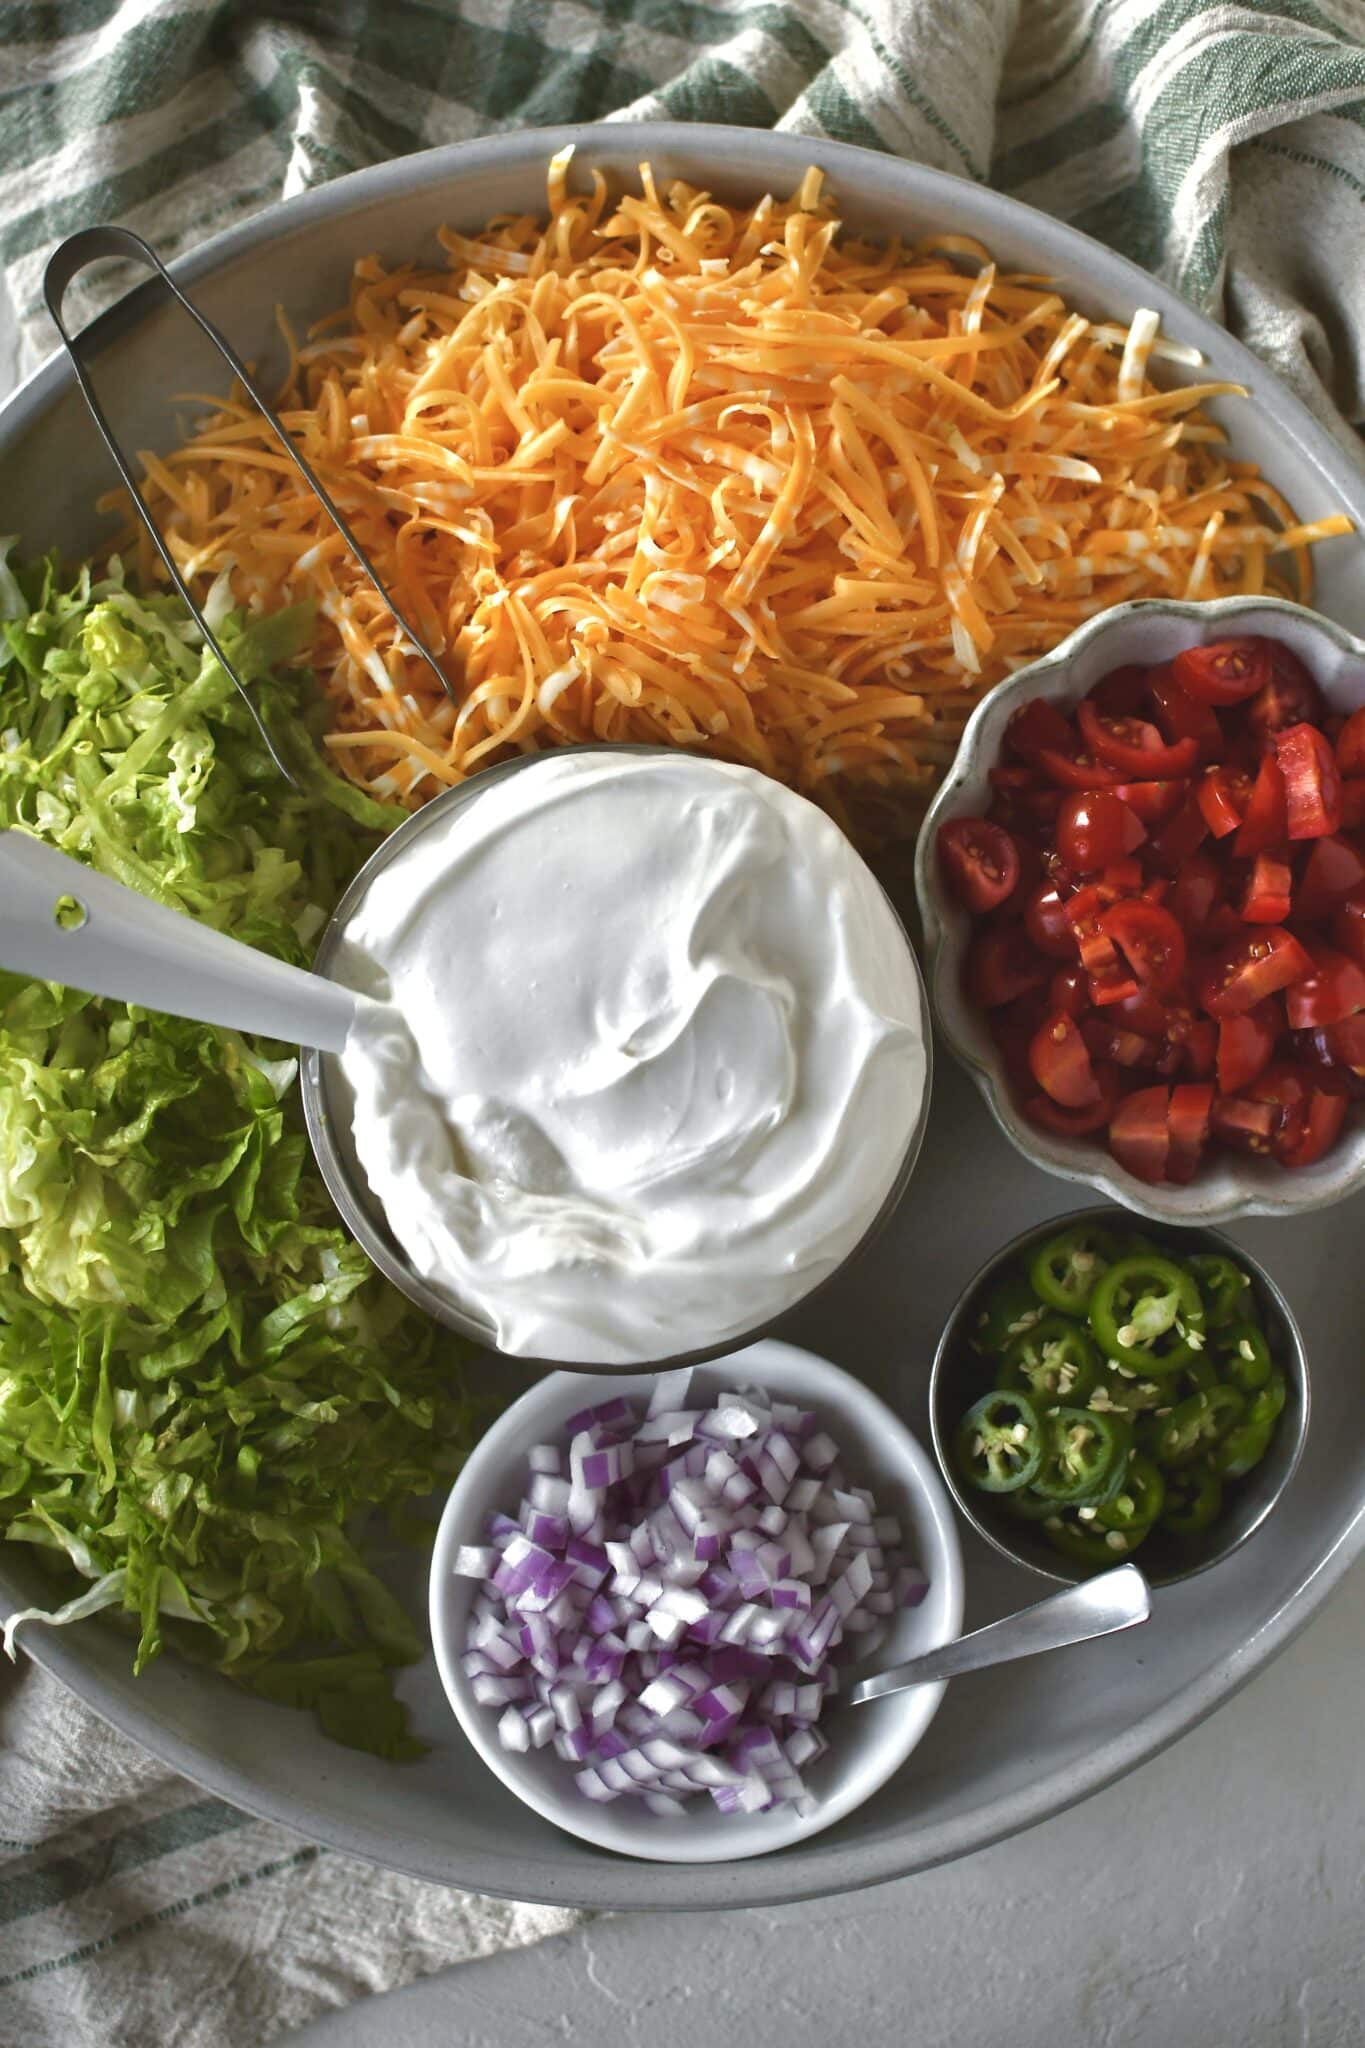 Optional toppings for tacos on a platter. Cheese, shaved lettuce, diced tomatoes and onions, sour cream, and sliced spicy peppers.